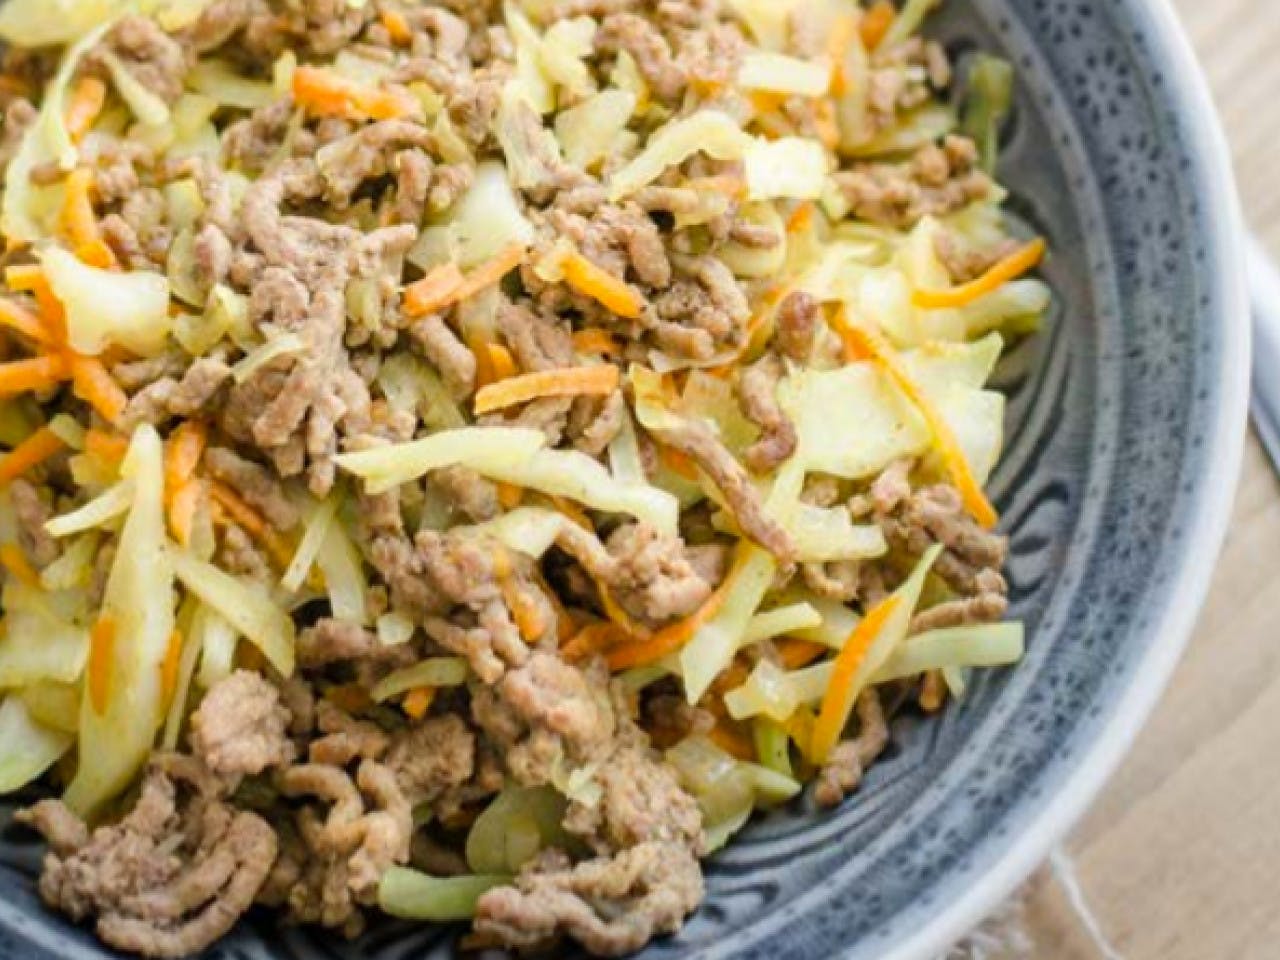 Stir-fried cabbage with minced meat